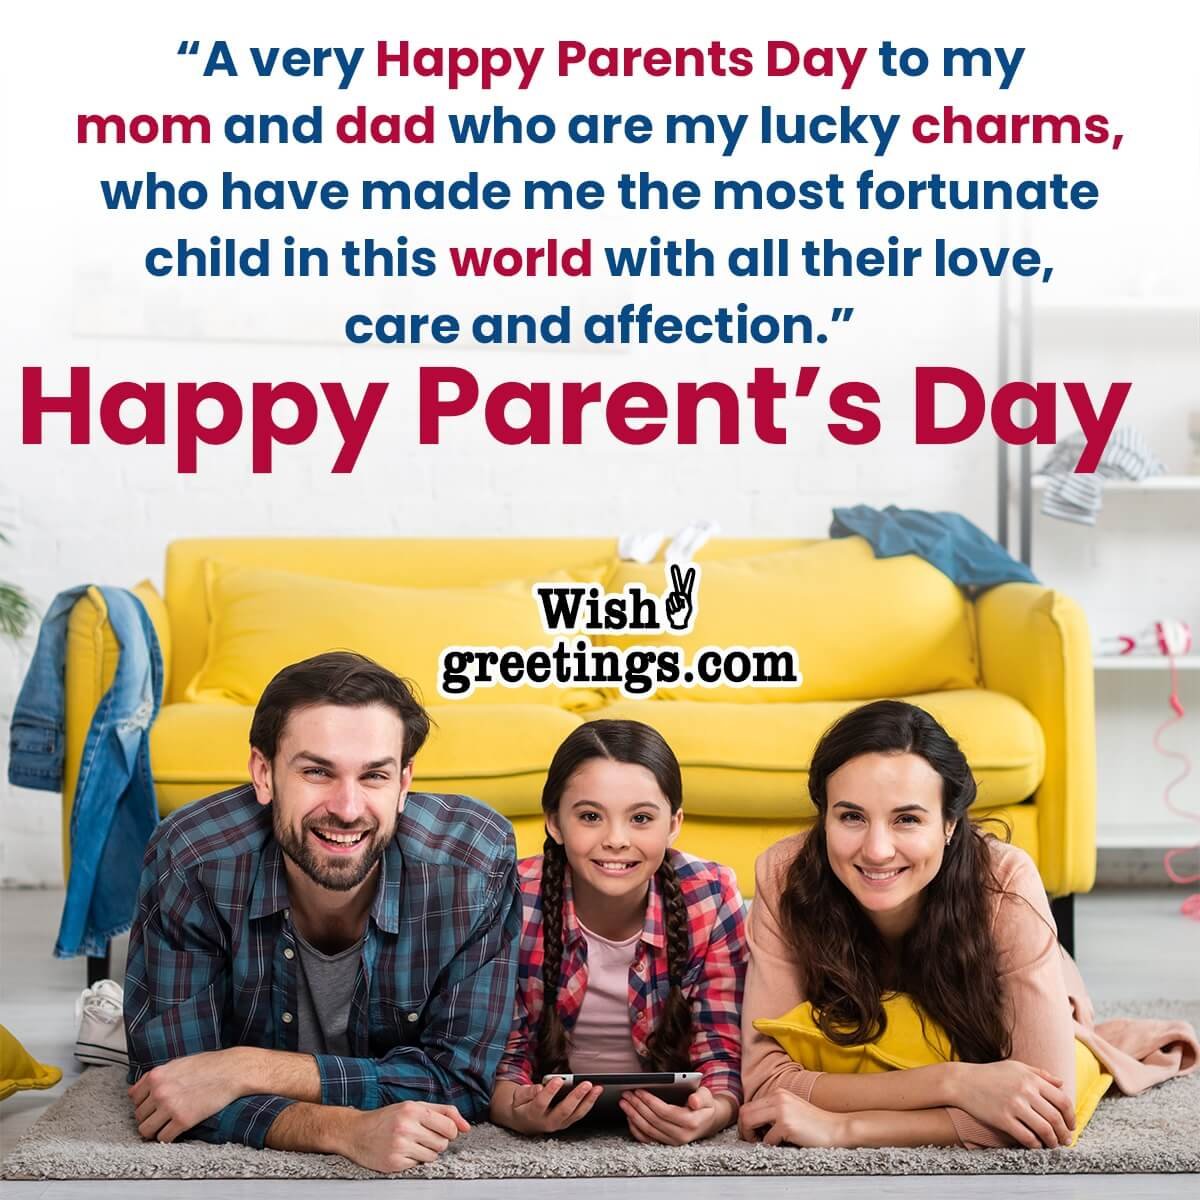 Happy Parents Day Greeting Card Message